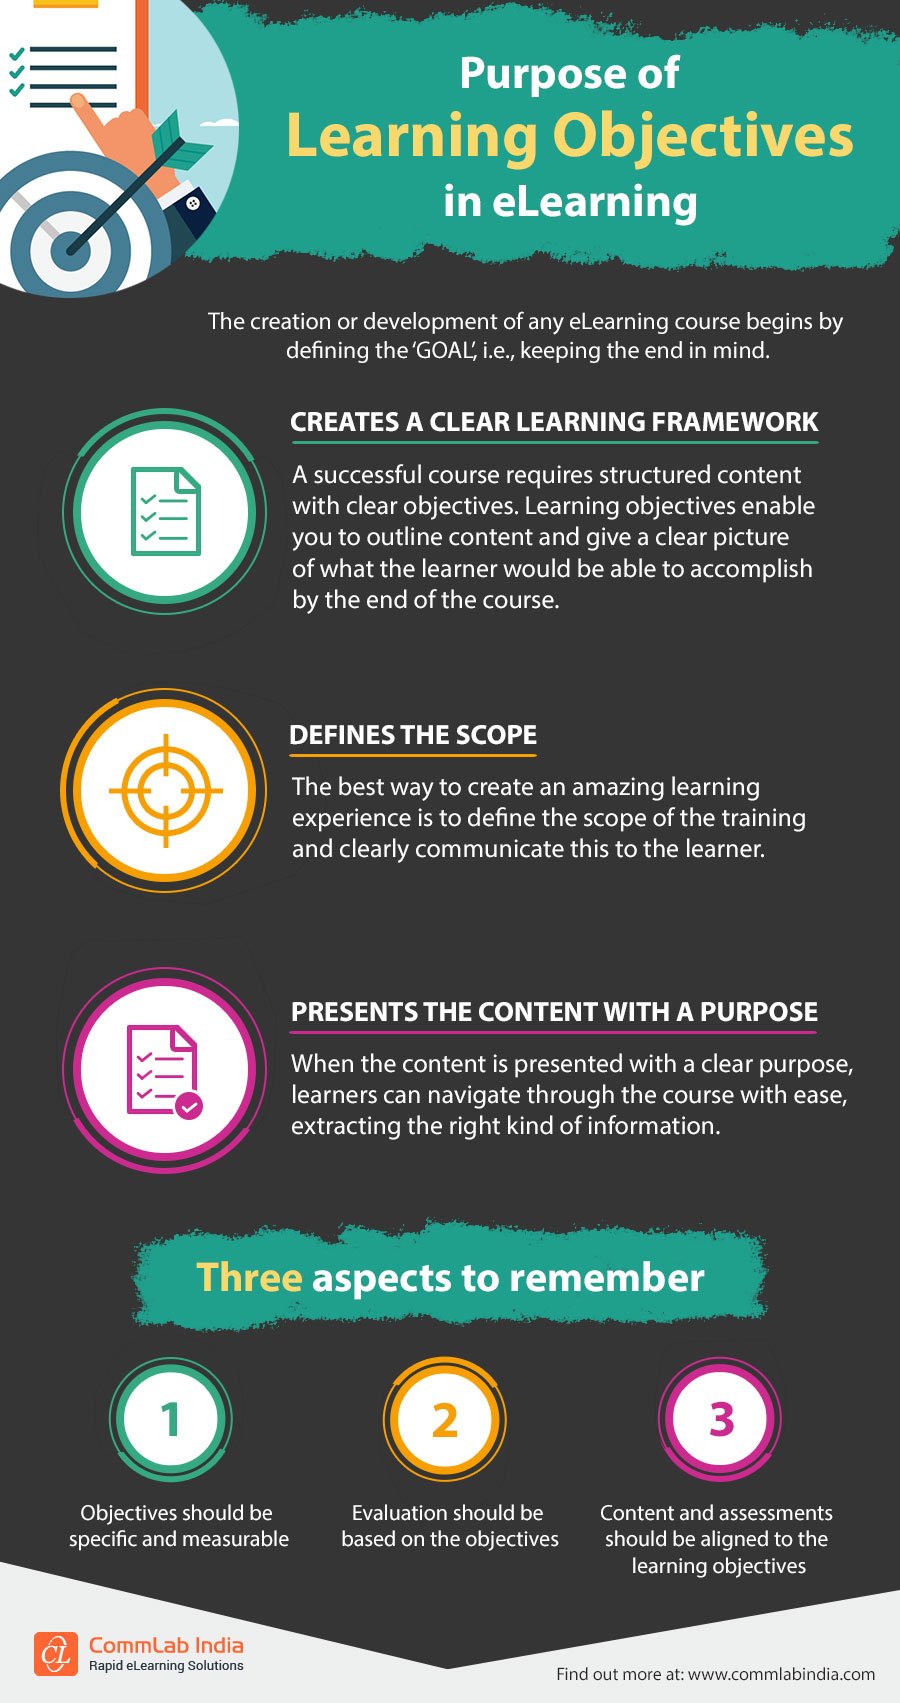 Purpose of Learning Objectives in eLearning [Infographic]